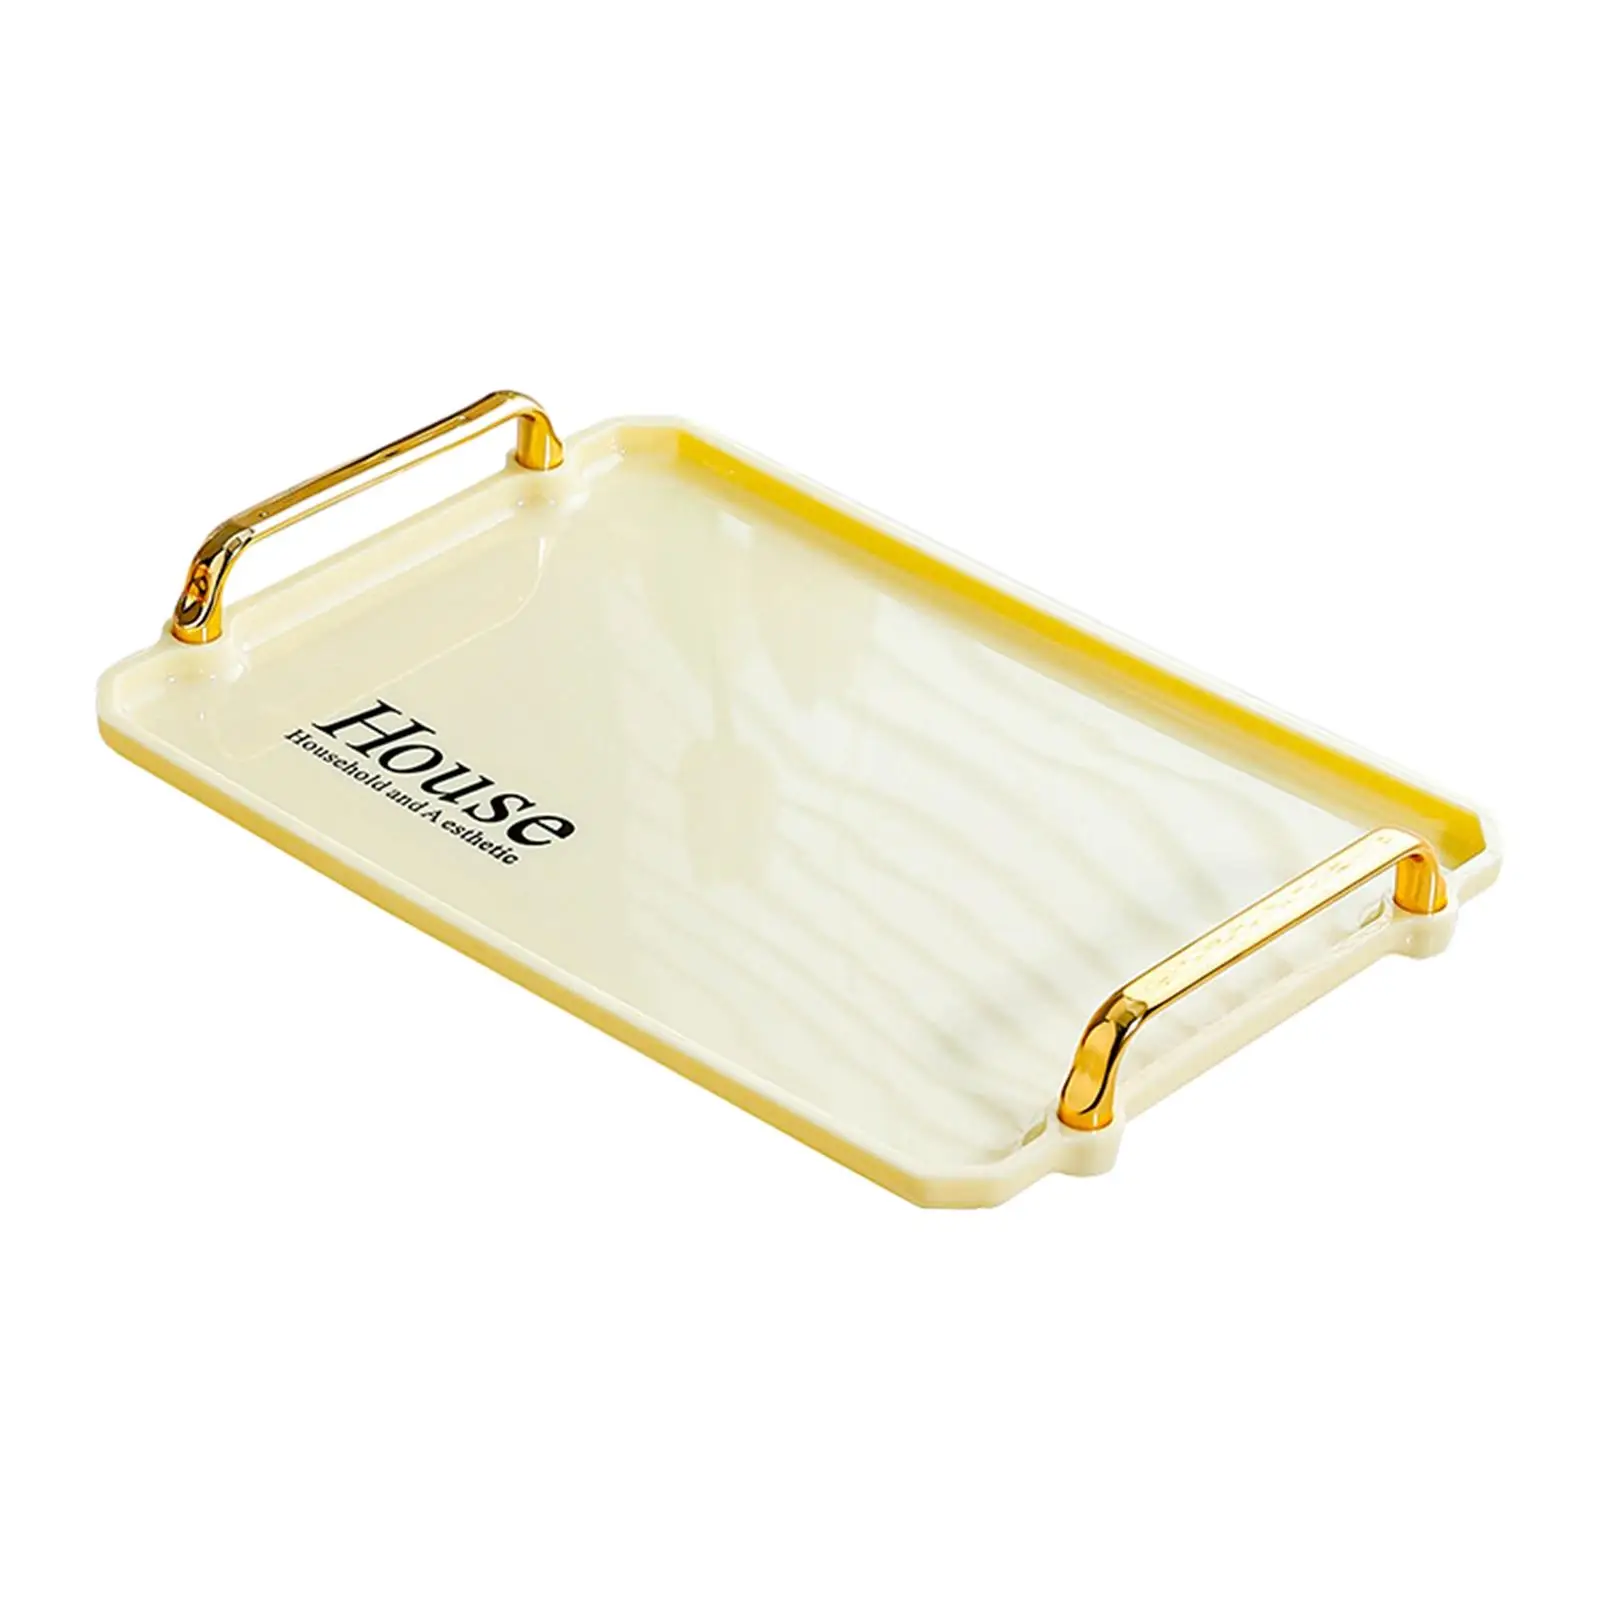 Serving Tray with Gold Handles Decorative Tray for Snacks Coffee Table